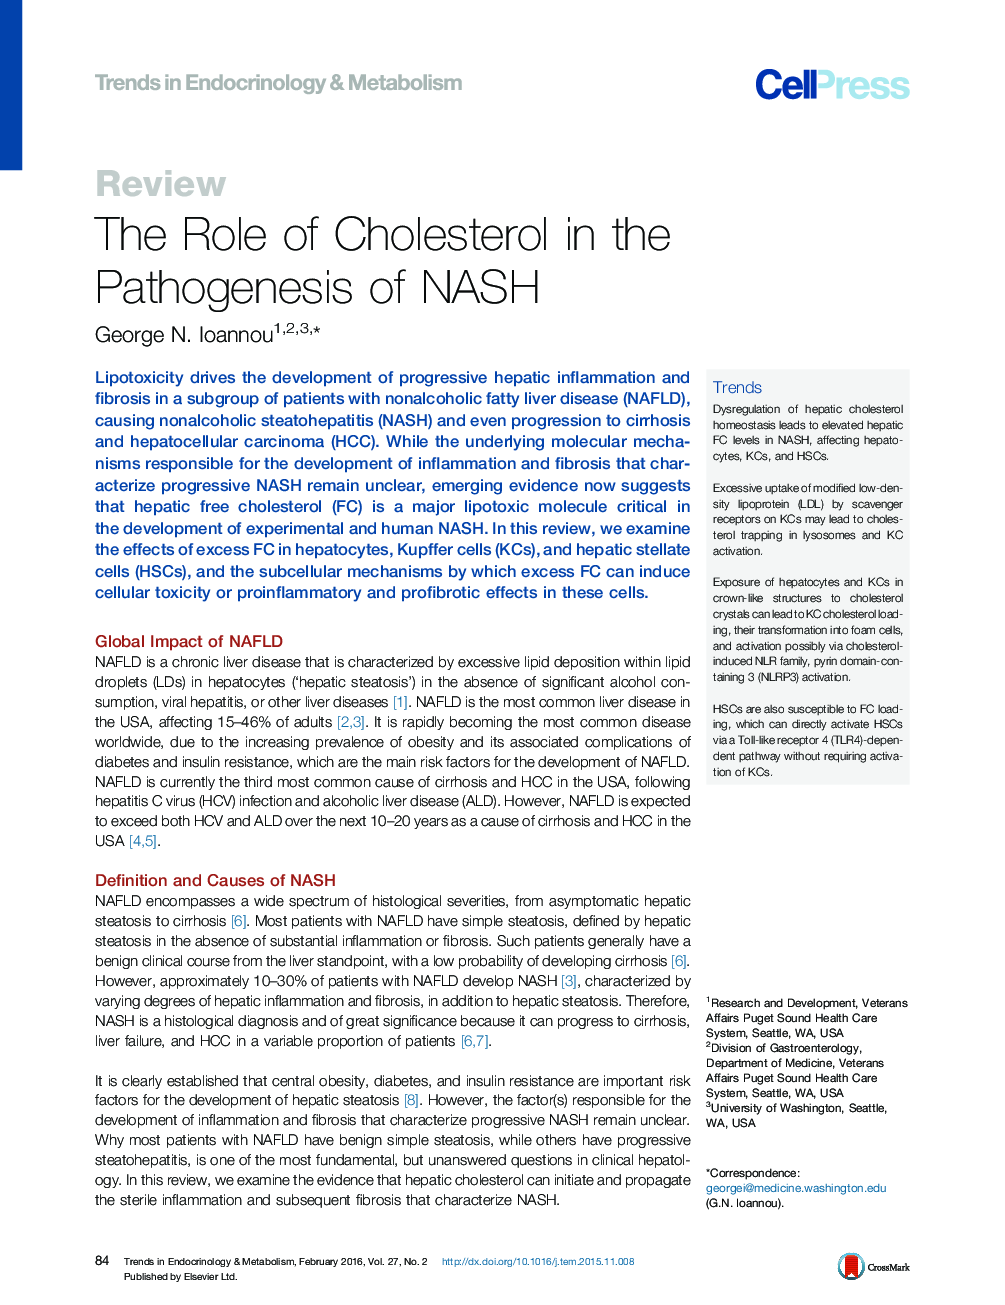 The Role of Cholesterol in the Pathogenesis of NASH